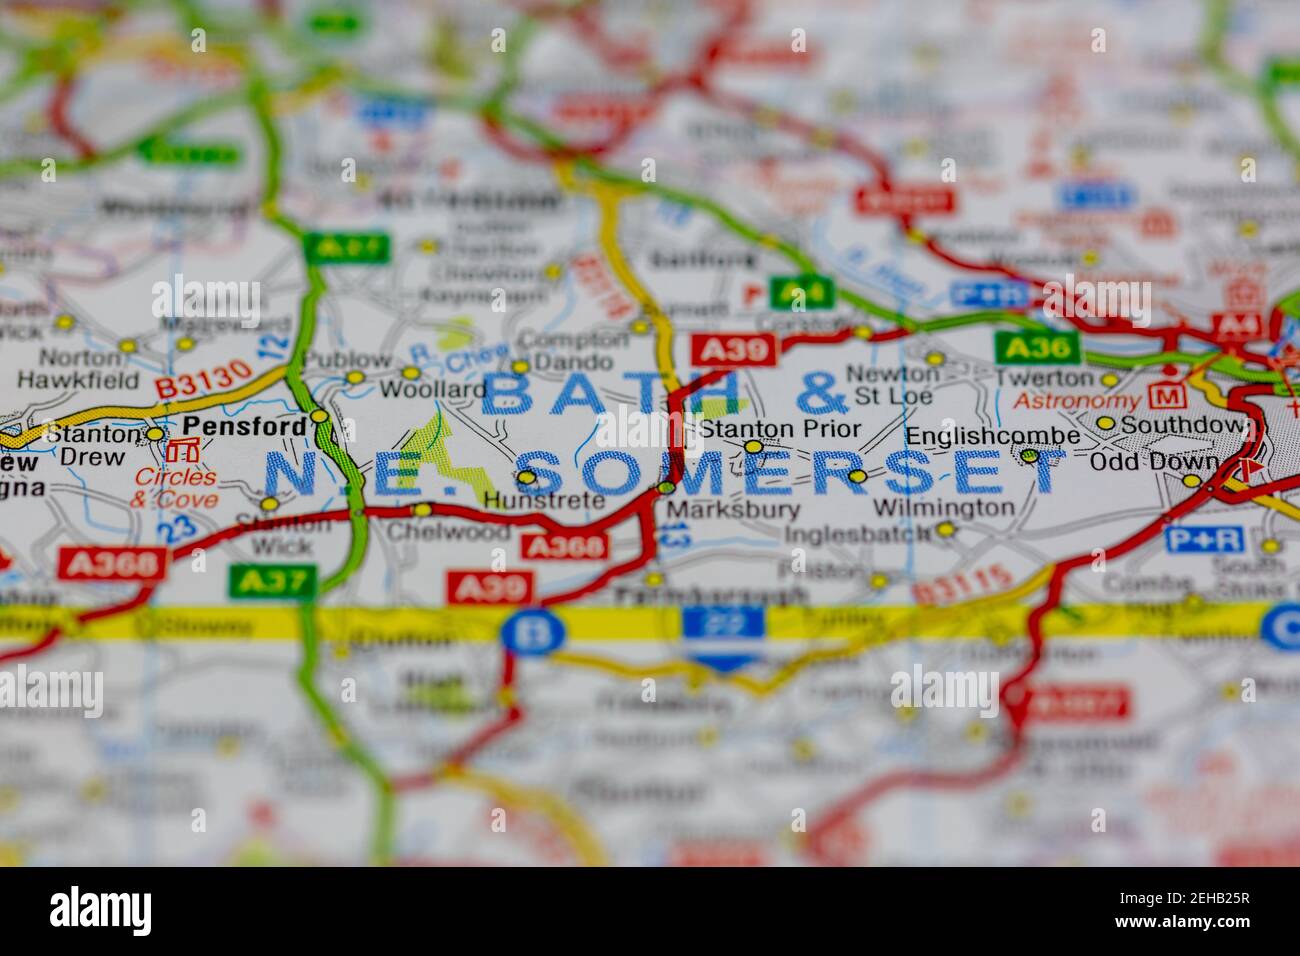 Bath and North East Somerset and surrounding areas shown on a road map or Geography map Stock Photo